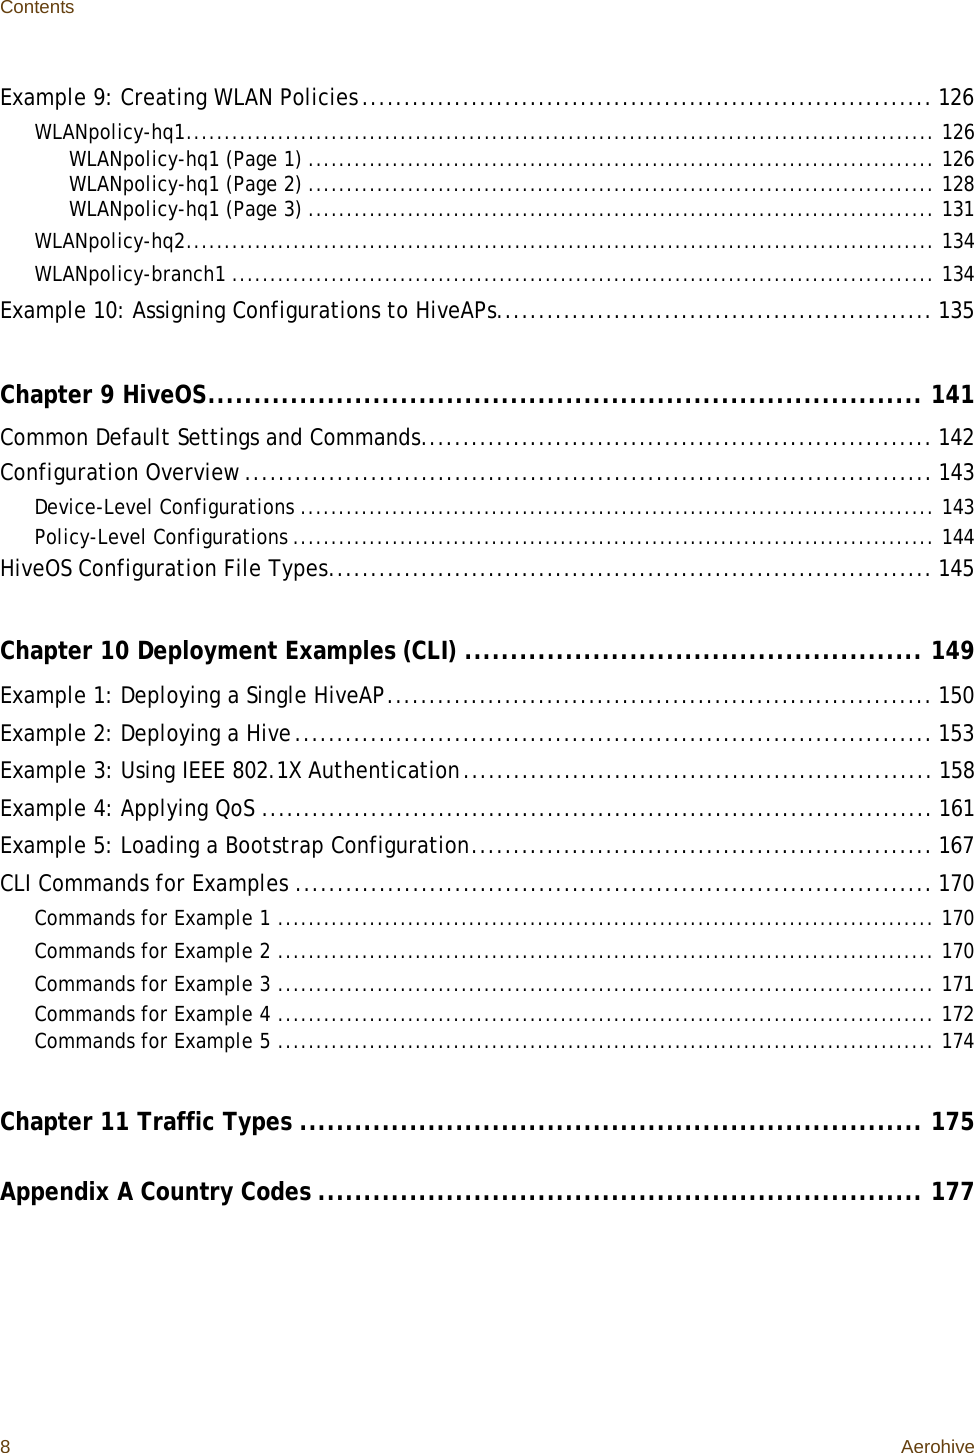 Contents8AerohiveExample 9: Creating WLAN Policies .................................................................... 126WLANpolicy-hq1.................................................................................................. 126WLANpolicy-hq1 (Page 1) .................................................................................. 126WLANpolicy-hq1 (Page 2) .................................................................................. 128WLANpolicy-hq1 (Page 3) .................................................................................. 131WLANpolicy-hq2.................................................................................................. 134WLANpolicy-branch1 ............................................................................................ 134Example 10: Assigning Configurations to HiveAPs.................................................... 135Chapter 9 HiveOS.............................................................................. 141Common Default Settings and Commands............................................................. 142Configuration Overview .................................................................................. 143Device-Level Configurations ................................................................................... 143Policy-Level Configurations .................................................................................... 144HiveOS Configuration File Types........................................................................ 145Chapter 10 Deployment Examples (CLI) .................................................. 149Example 1: Deploying a Single HiveAP................................................................. 150Example 2: Deploying a Hive............................................................................ 153Example 3: Using IEEE 802.1X Authentication........................................................ 158Example 4: Applying QoS ................................................................................ 161Example 5: Loading a Bootstrap Configuration....................................................... 167CLI Commands for Examples ............................................................................ 170Commands for Example 1 ...................................................................................... 170Commands for Example 2 ...................................................................................... 170Commands for Example 3 ...................................................................................... 171Commands for Example 4 ...................................................................................... 172Commands for Example 5 ...................................................................................... 174Chapter 11 Traffic Types .................................................................... 175Appendix A Country Codes .................................................................. 177